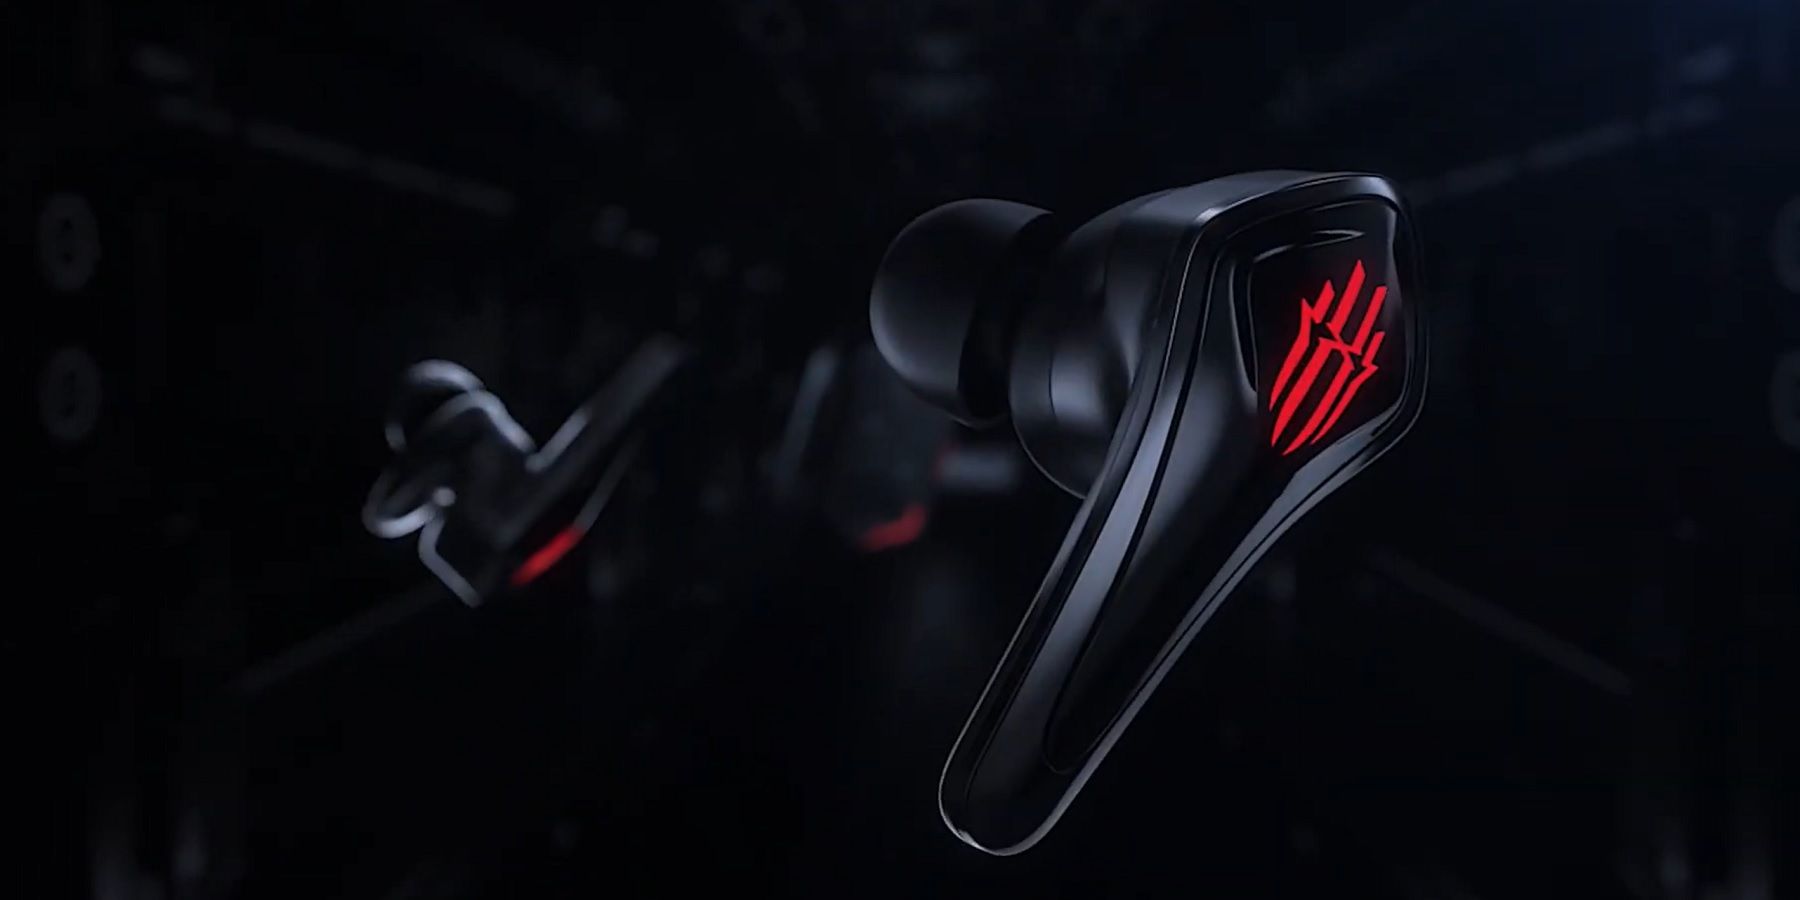 RedMagic CyberPods Wireless Earbuds Are Great For Gamers, Here’s Why